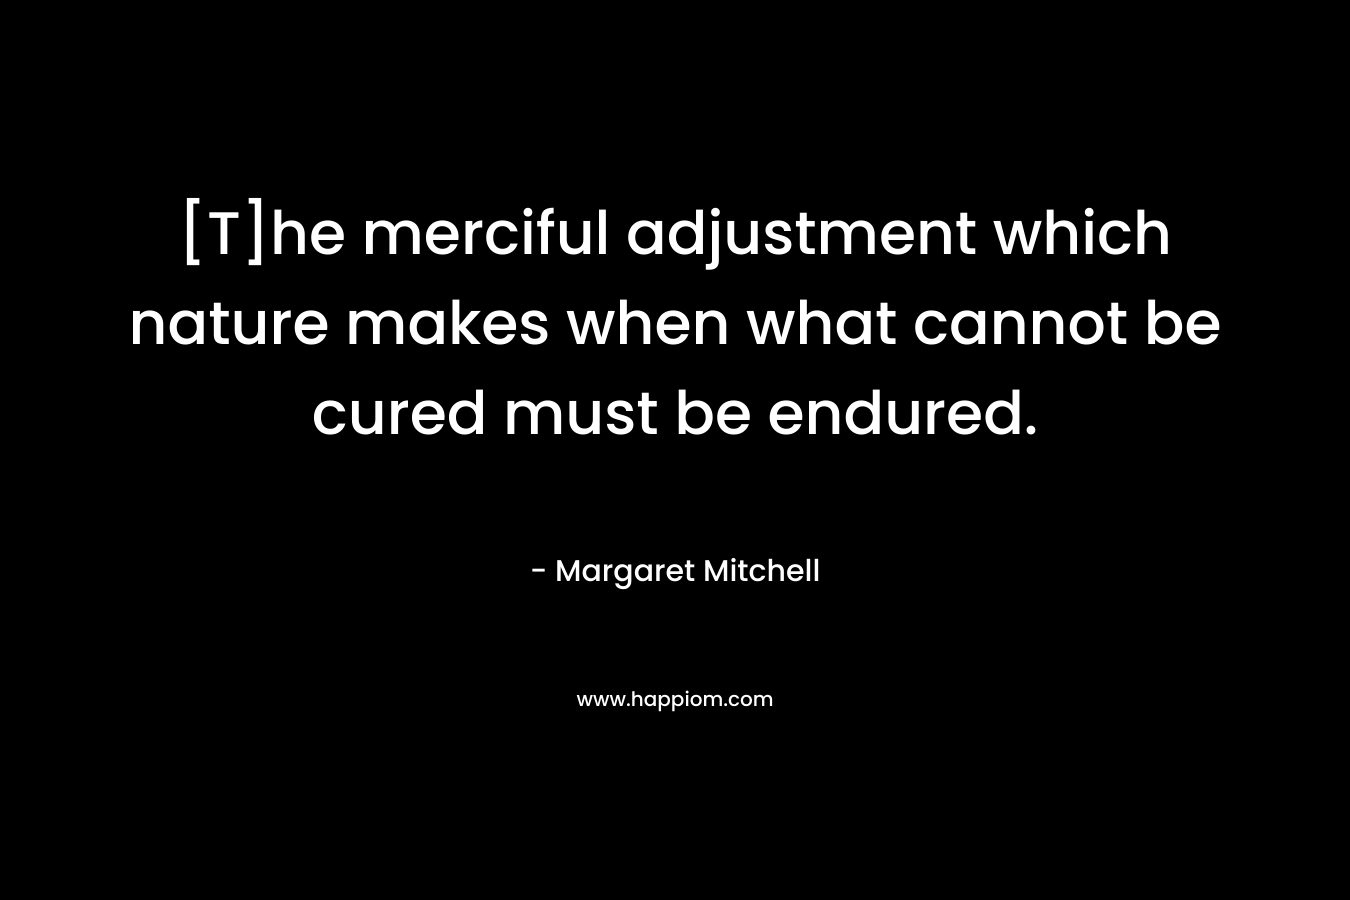 [T]he merciful adjustment which nature makes when what cannot be cured must be endured. – Margaret Mitchell